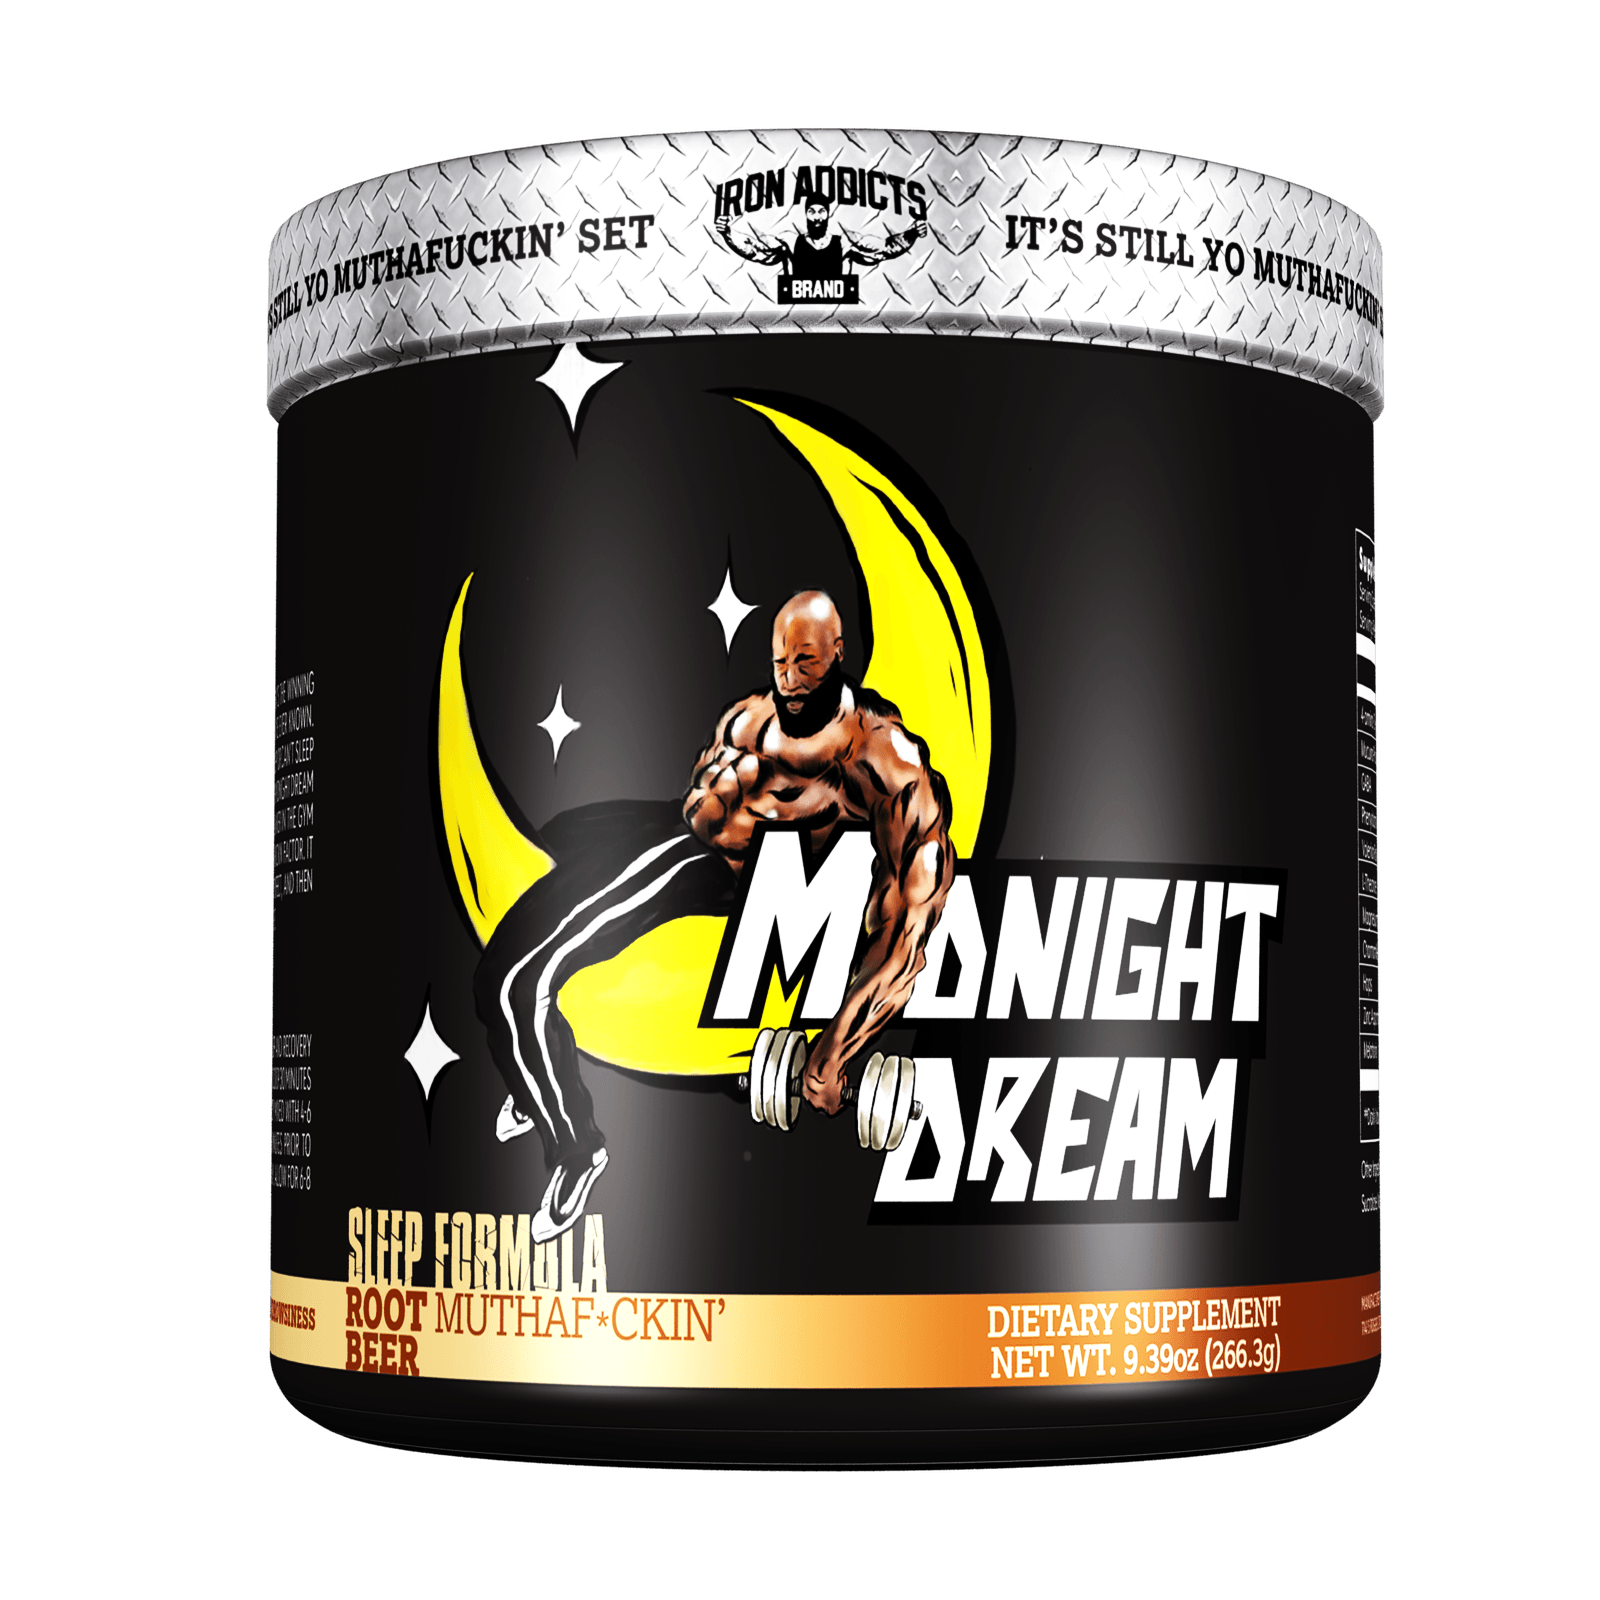 Midnight Dream, 266 g, Iron Addicts Brand. Special supplements. 